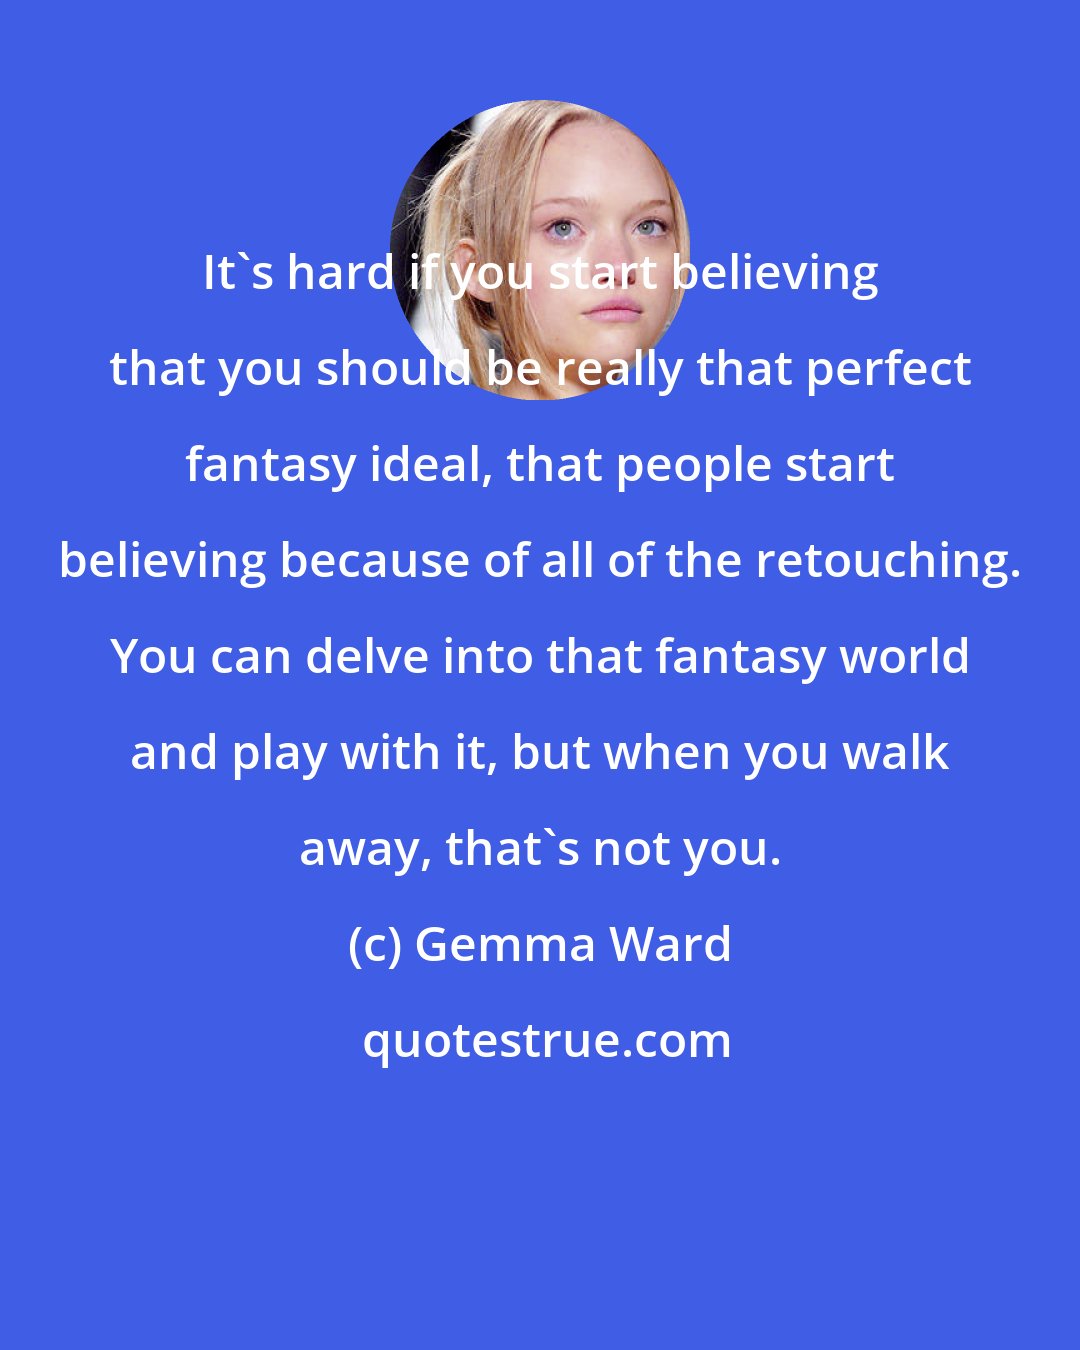 Gemma Ward: It's hard if you start believing that you should be really that perfect fantasy ideal, that people start believing because of all of the retouching. You can delve into that fantasy world and play with it, but when you walk away, that's not you.